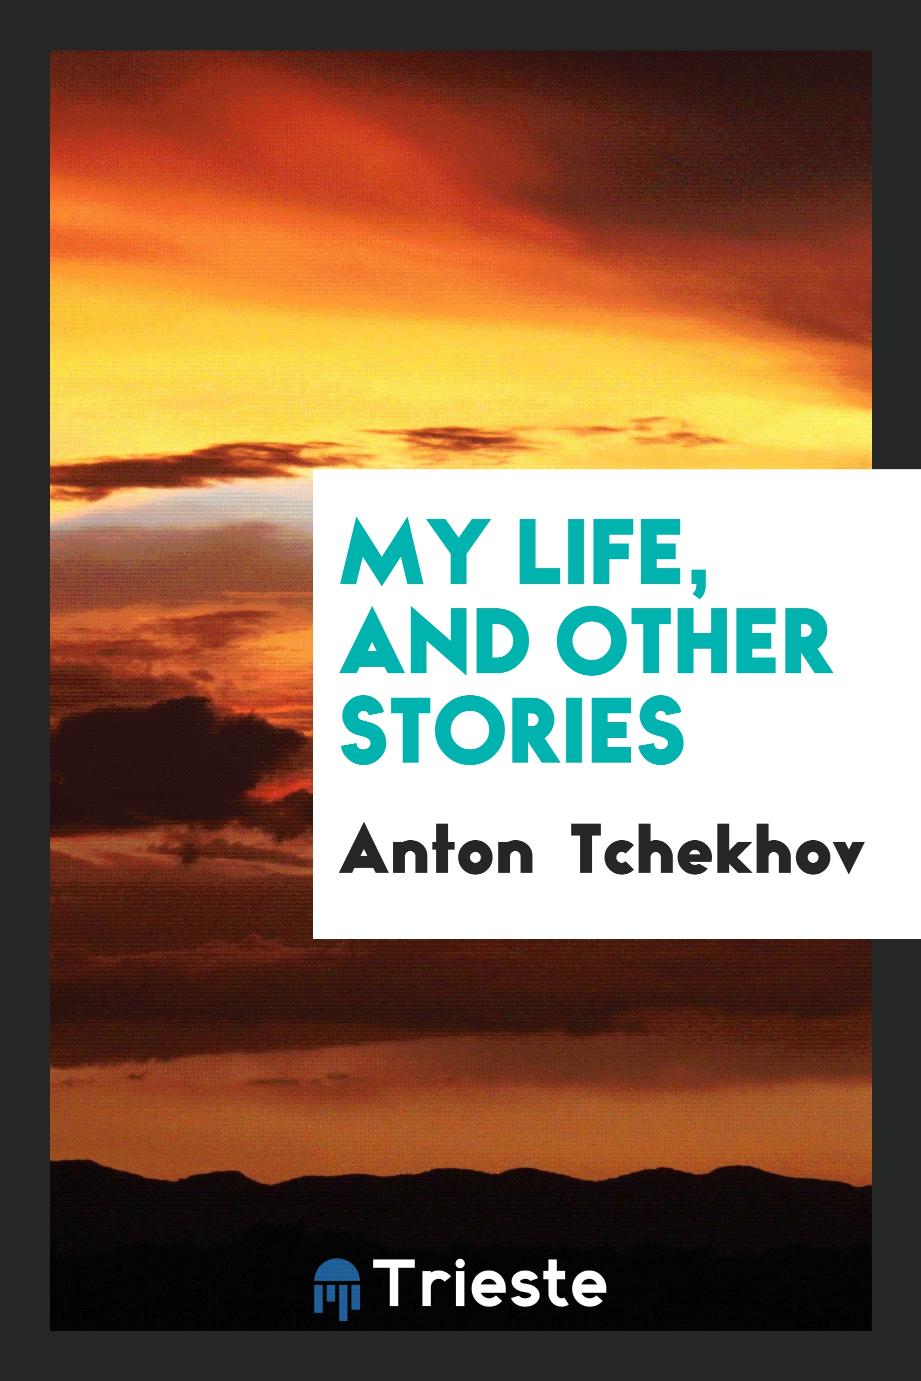 My life, and other stories